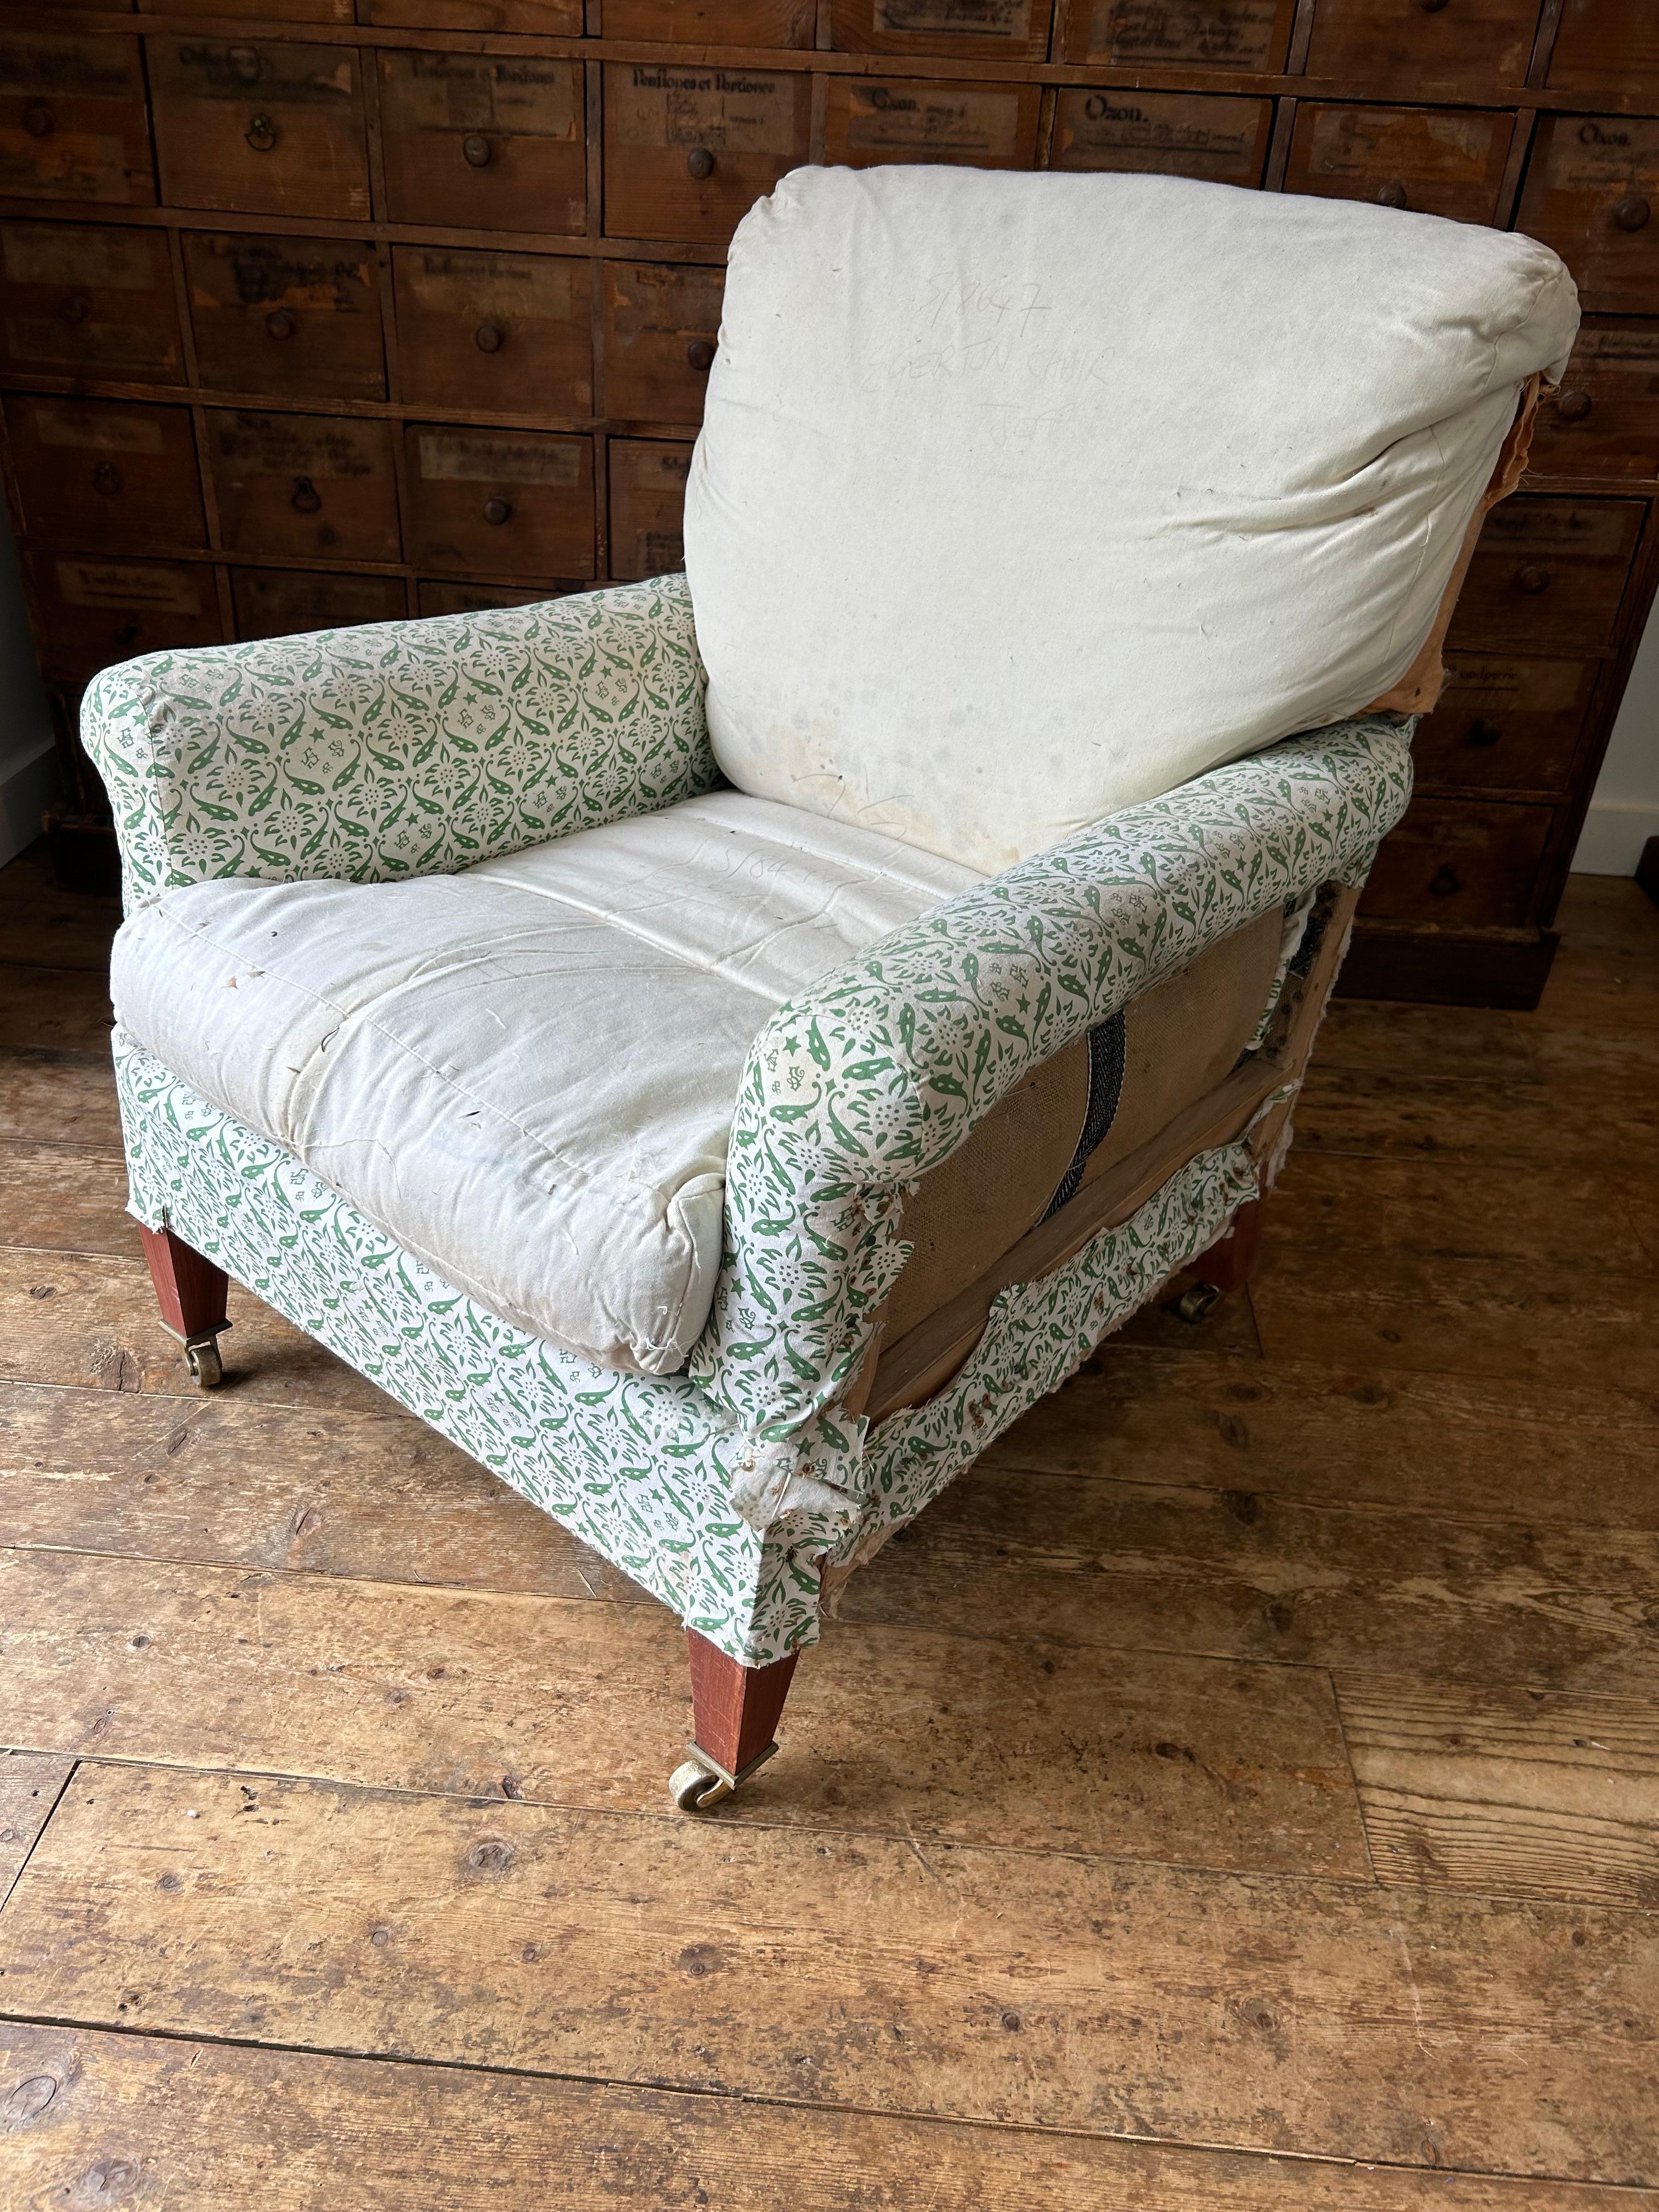 An extremely comfortable Howard Chair’s Ltd Egerton model arm chair, retaining its original H and S monogrammed ticking. The chair also has its original rear sack and feather and down cushion, with pencil inscription of the chair model and the